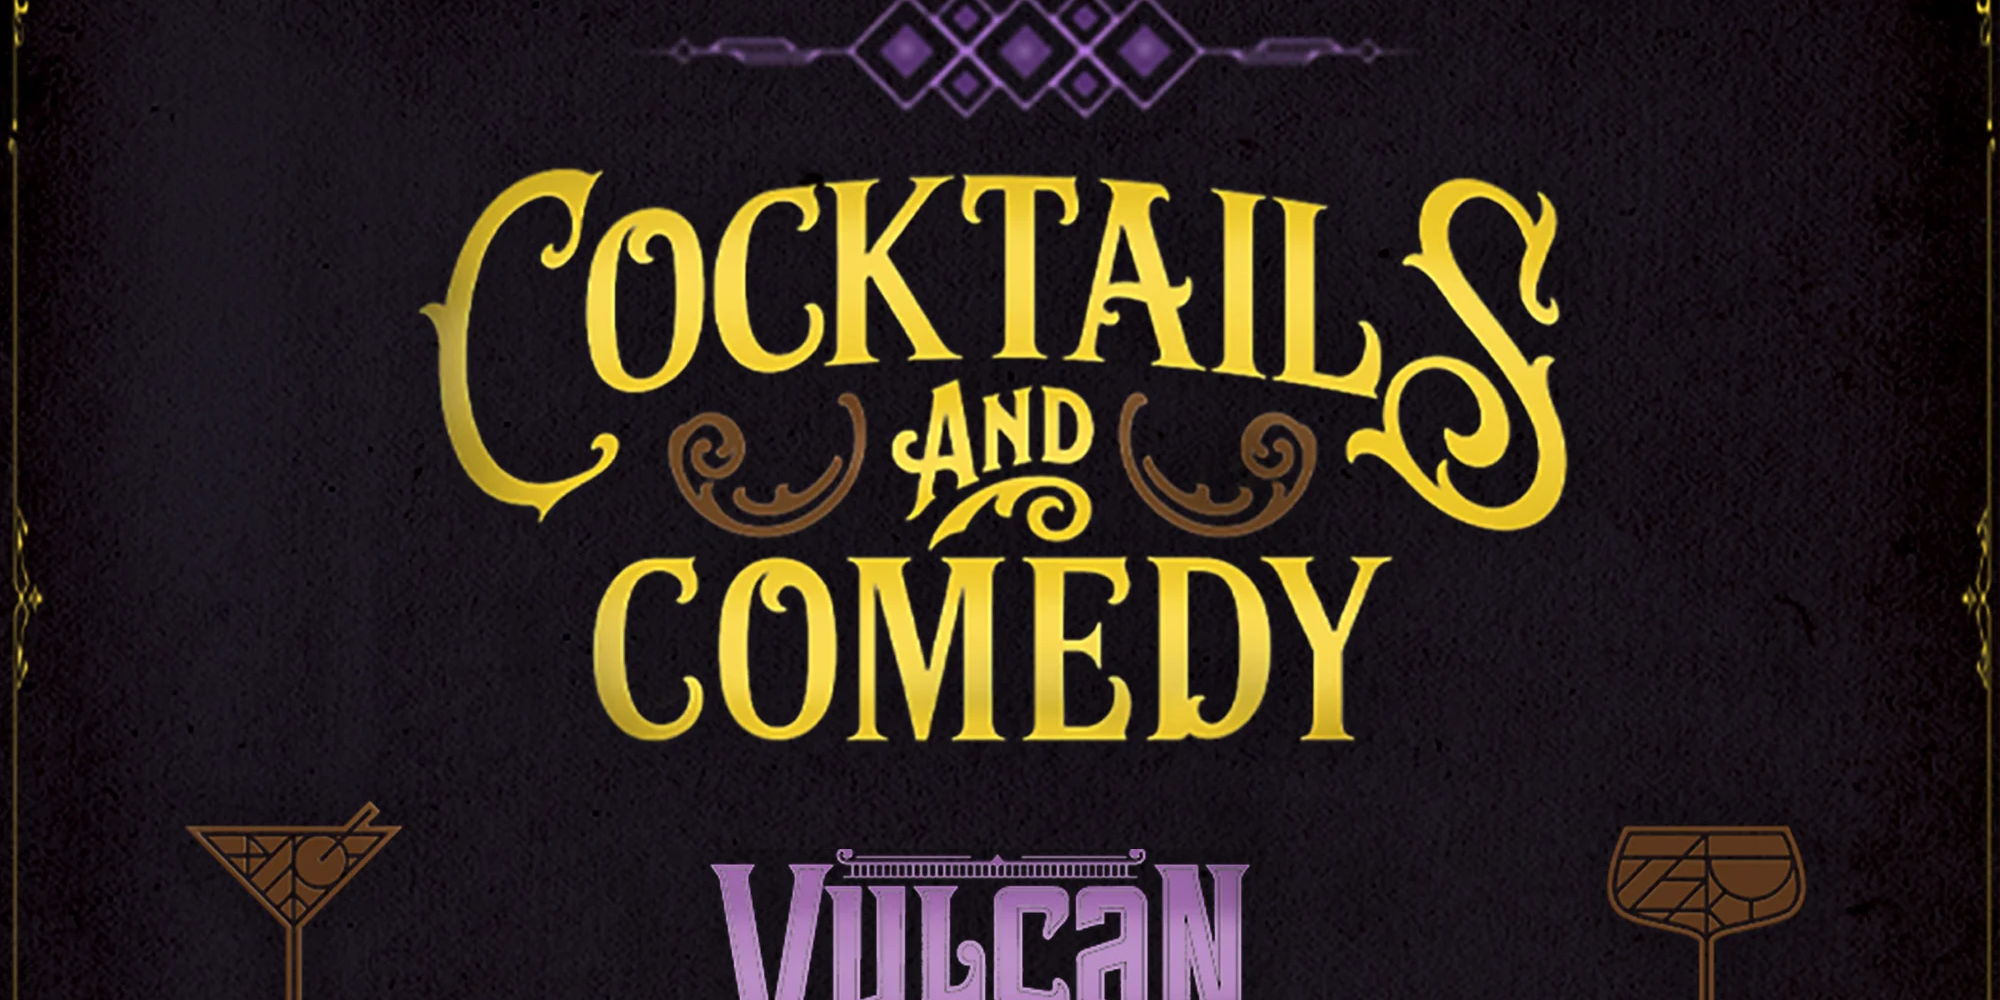 Cocktails & Comedy promotional image